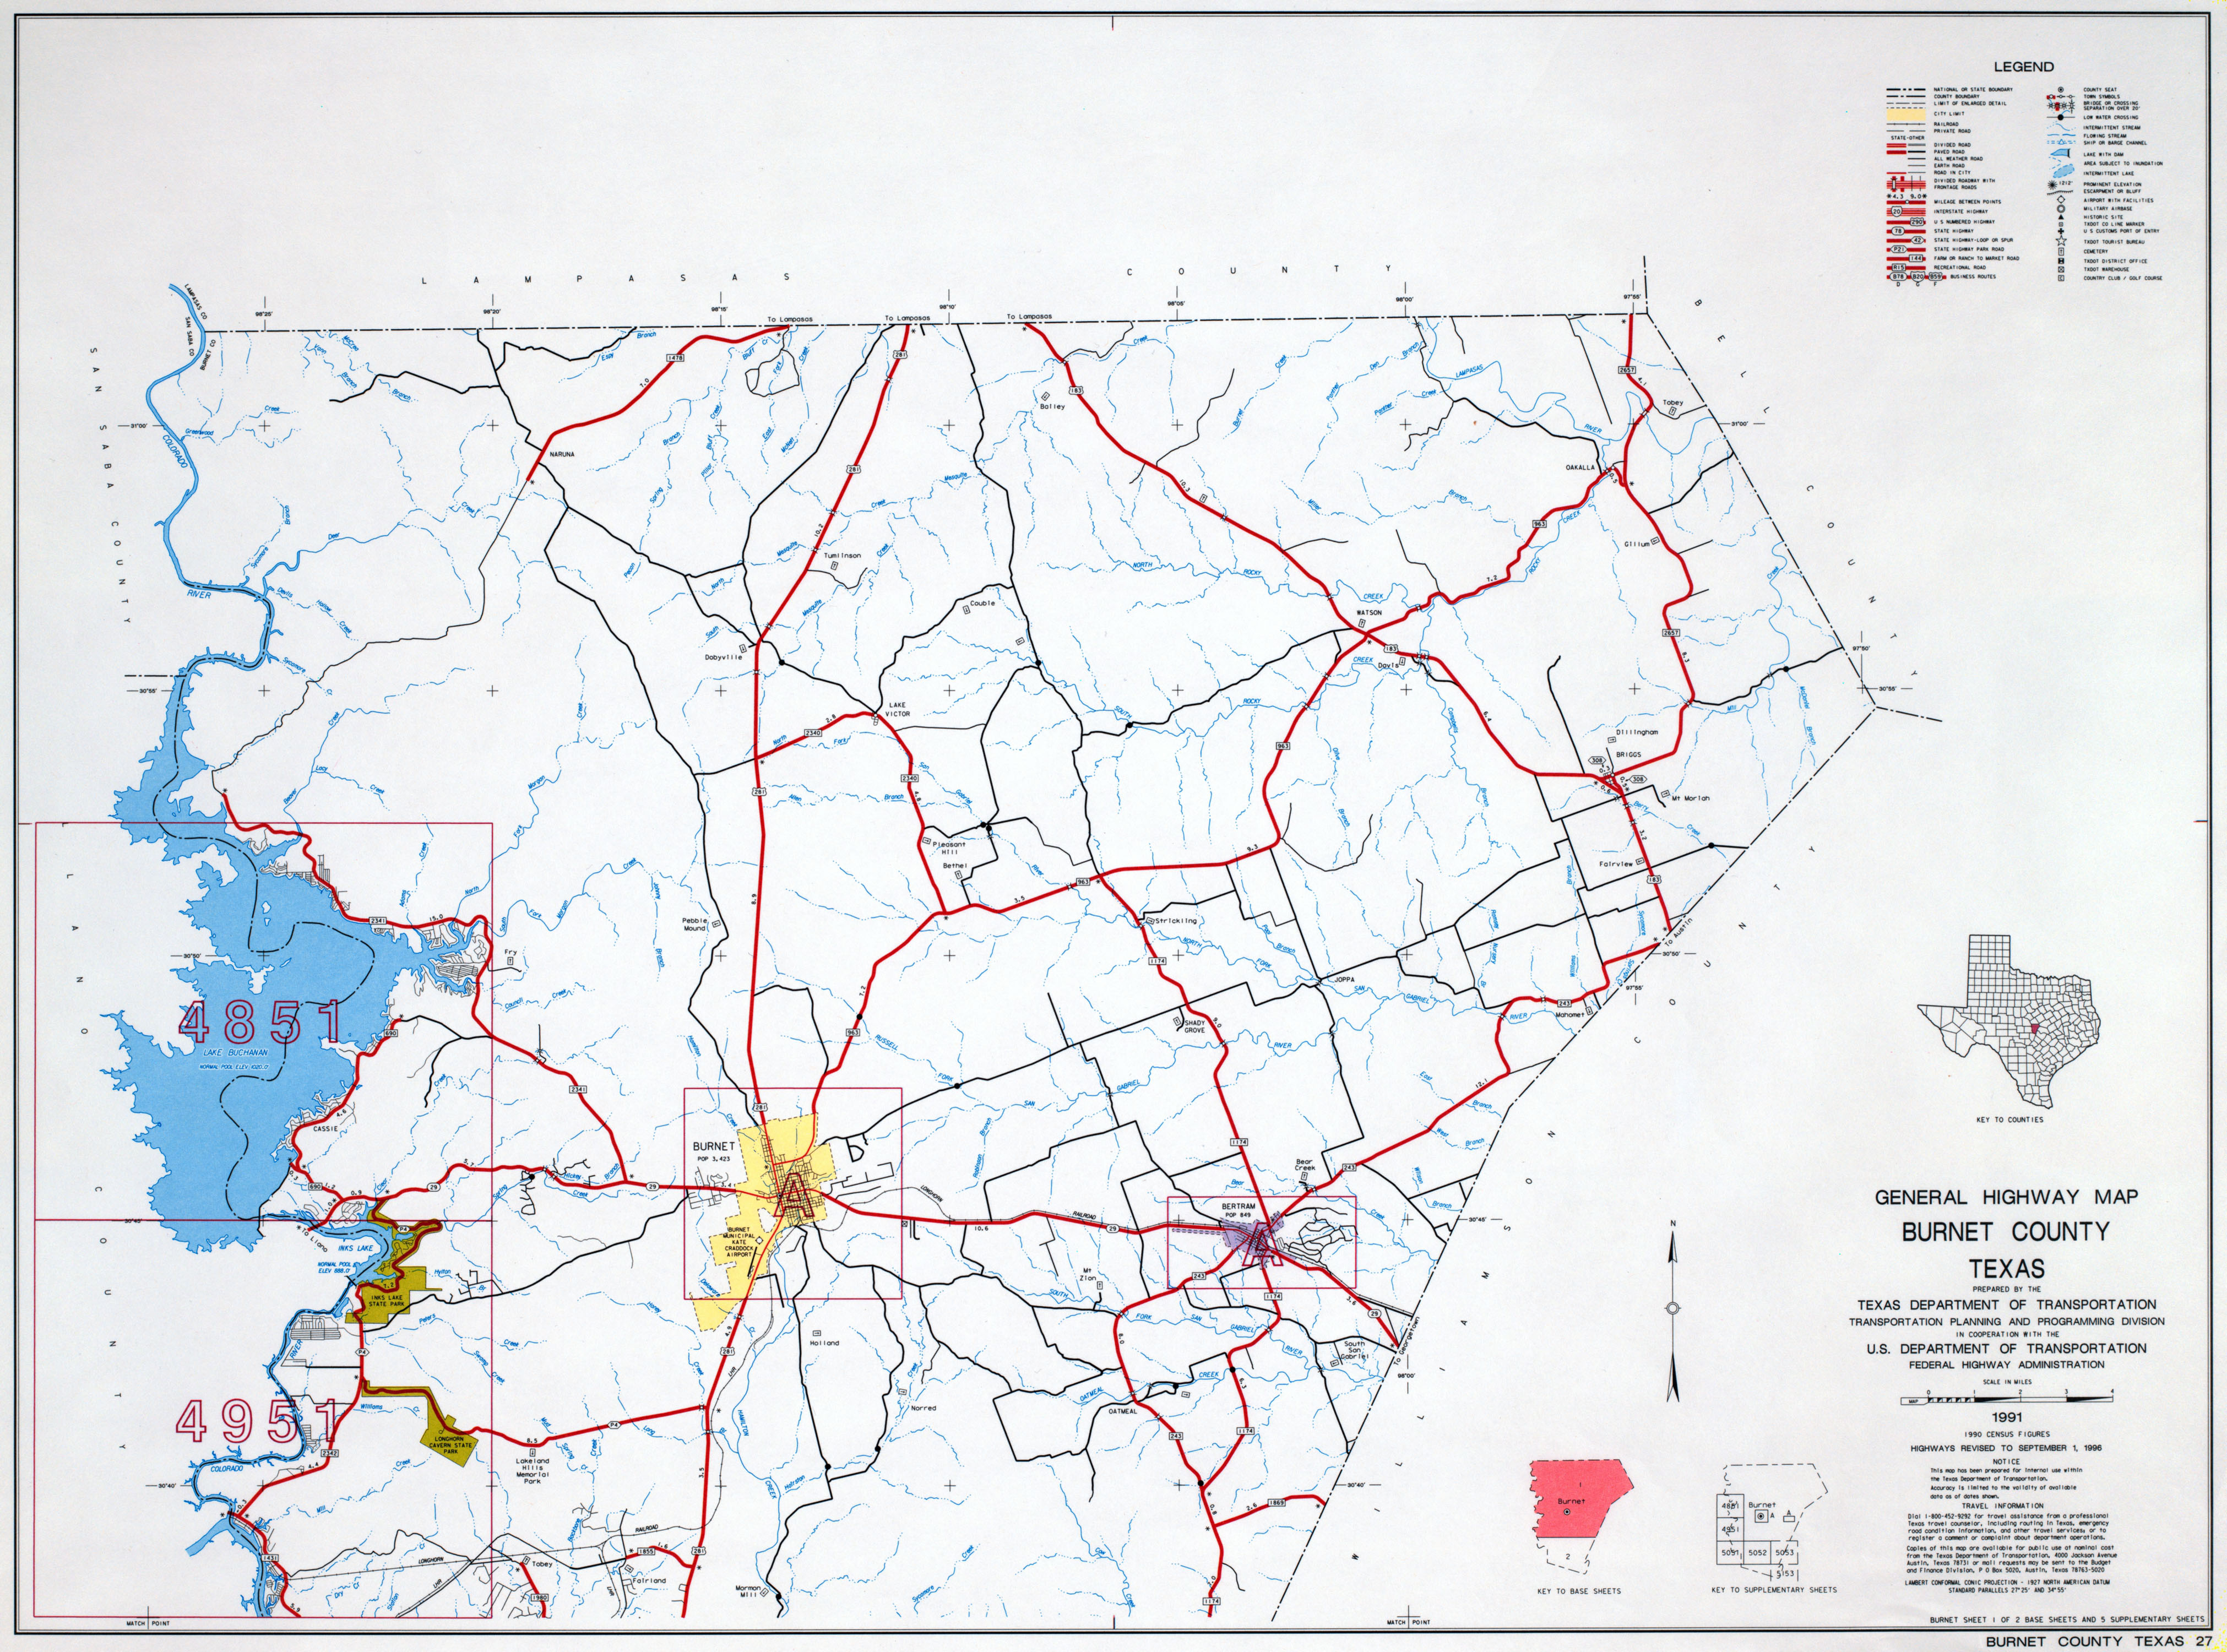 Texas County Highway Maps Browse Perry Castaneda Map Collection